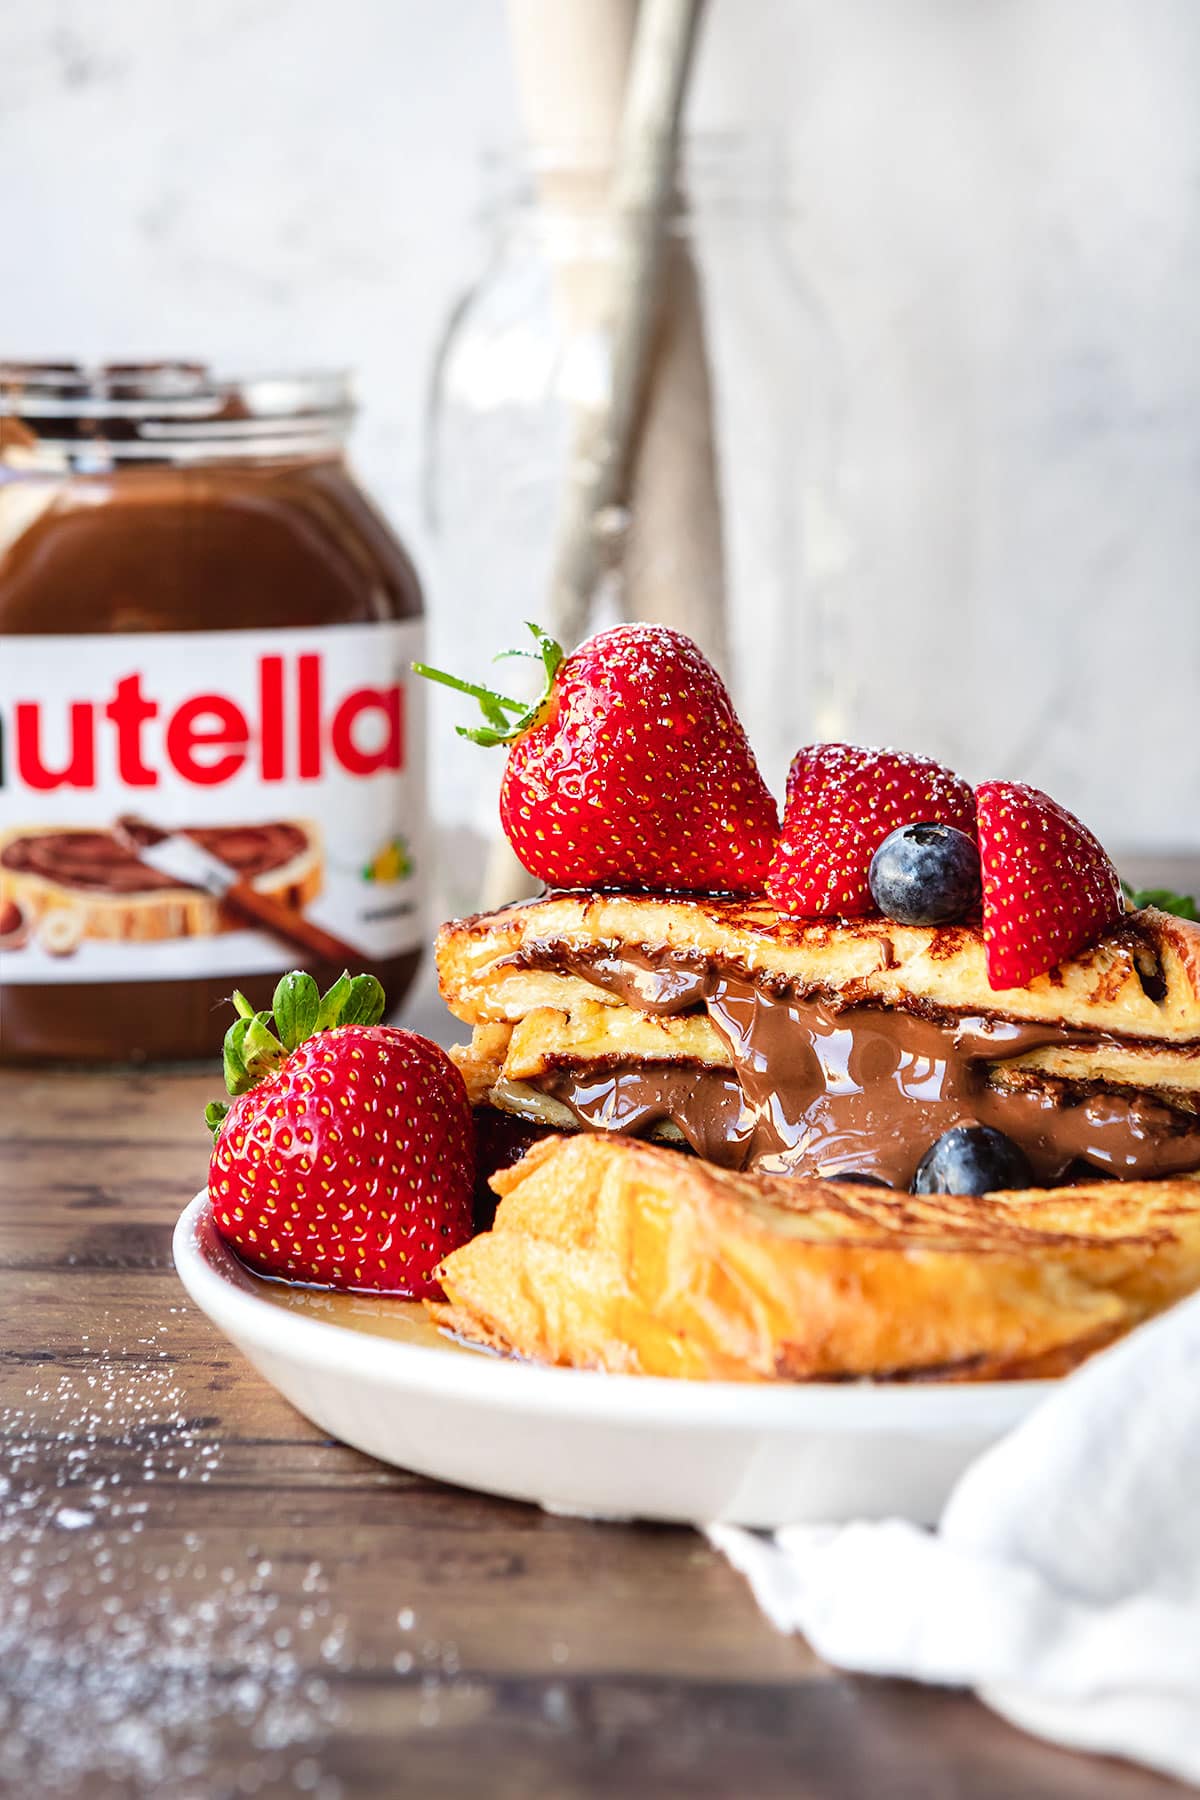 Stuffed Nutella French Toast with berries on top and Nutella Jar